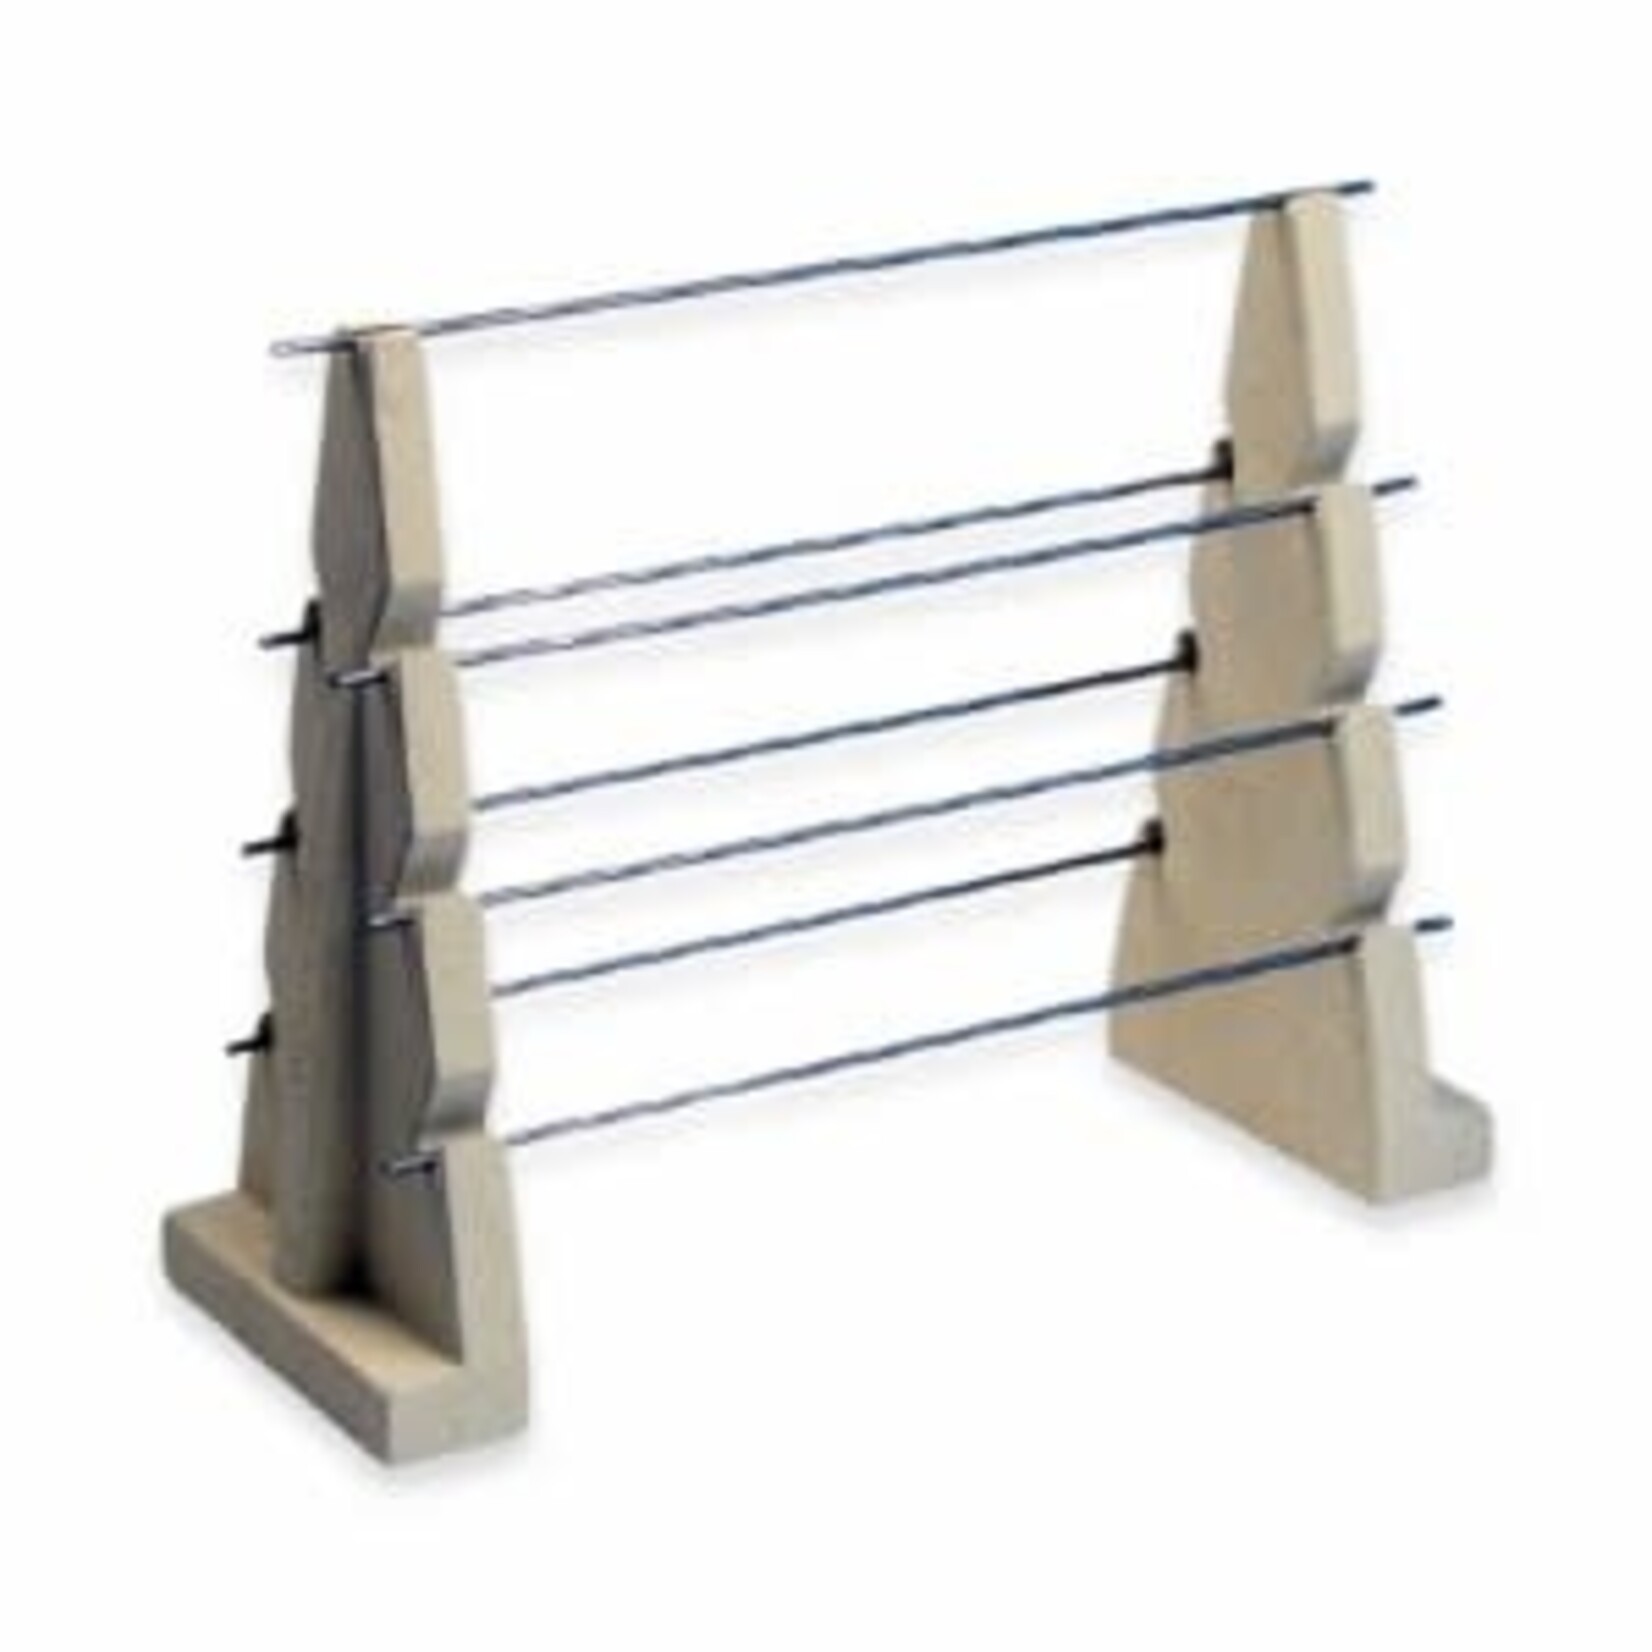 The Ceramic Shop Star Bead Rack, 7p of 10” wire